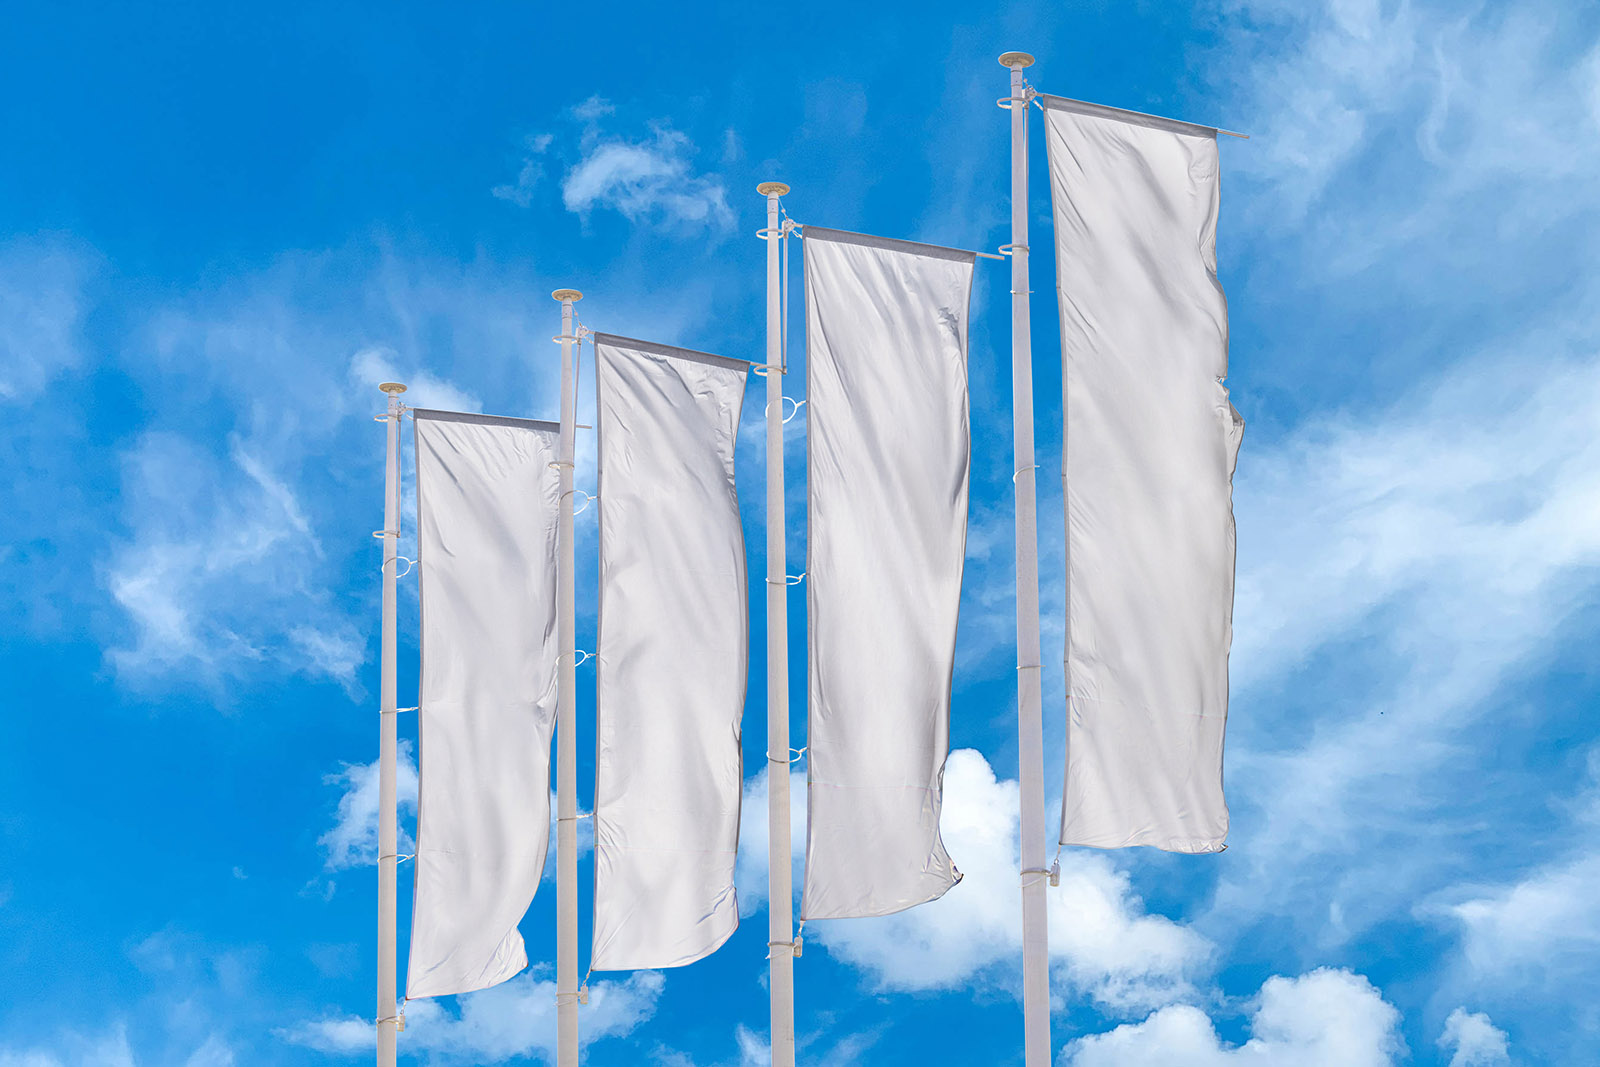 Four flags mockup